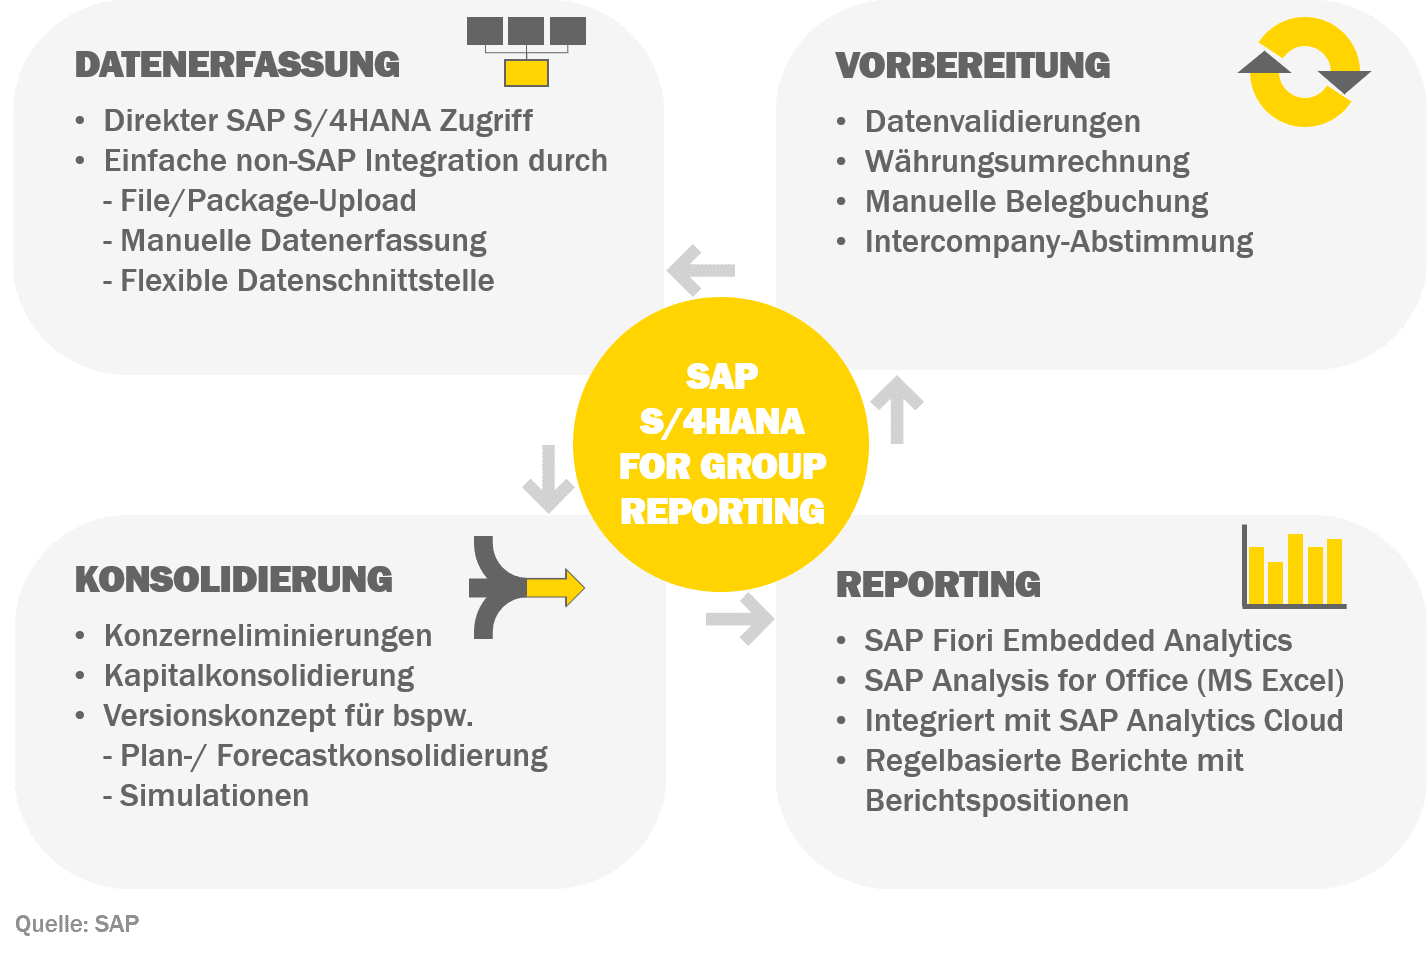 Bestandteile von S/4HANA for Group Reporting